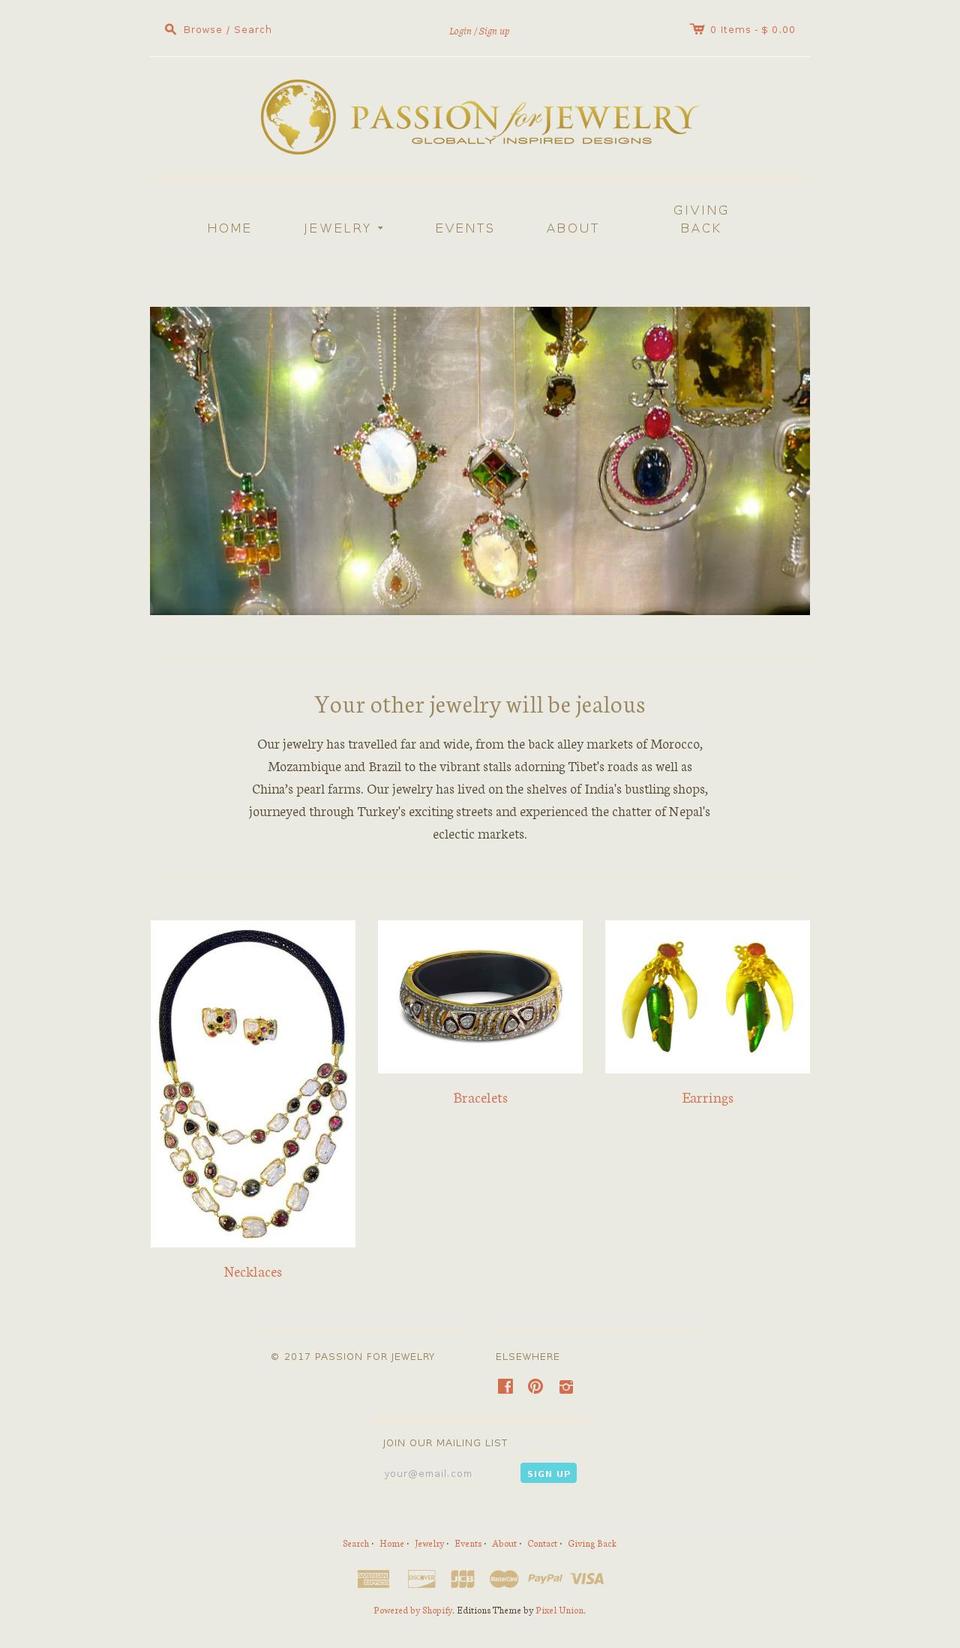 Editions Shopify theme site example passionforjewelry.com